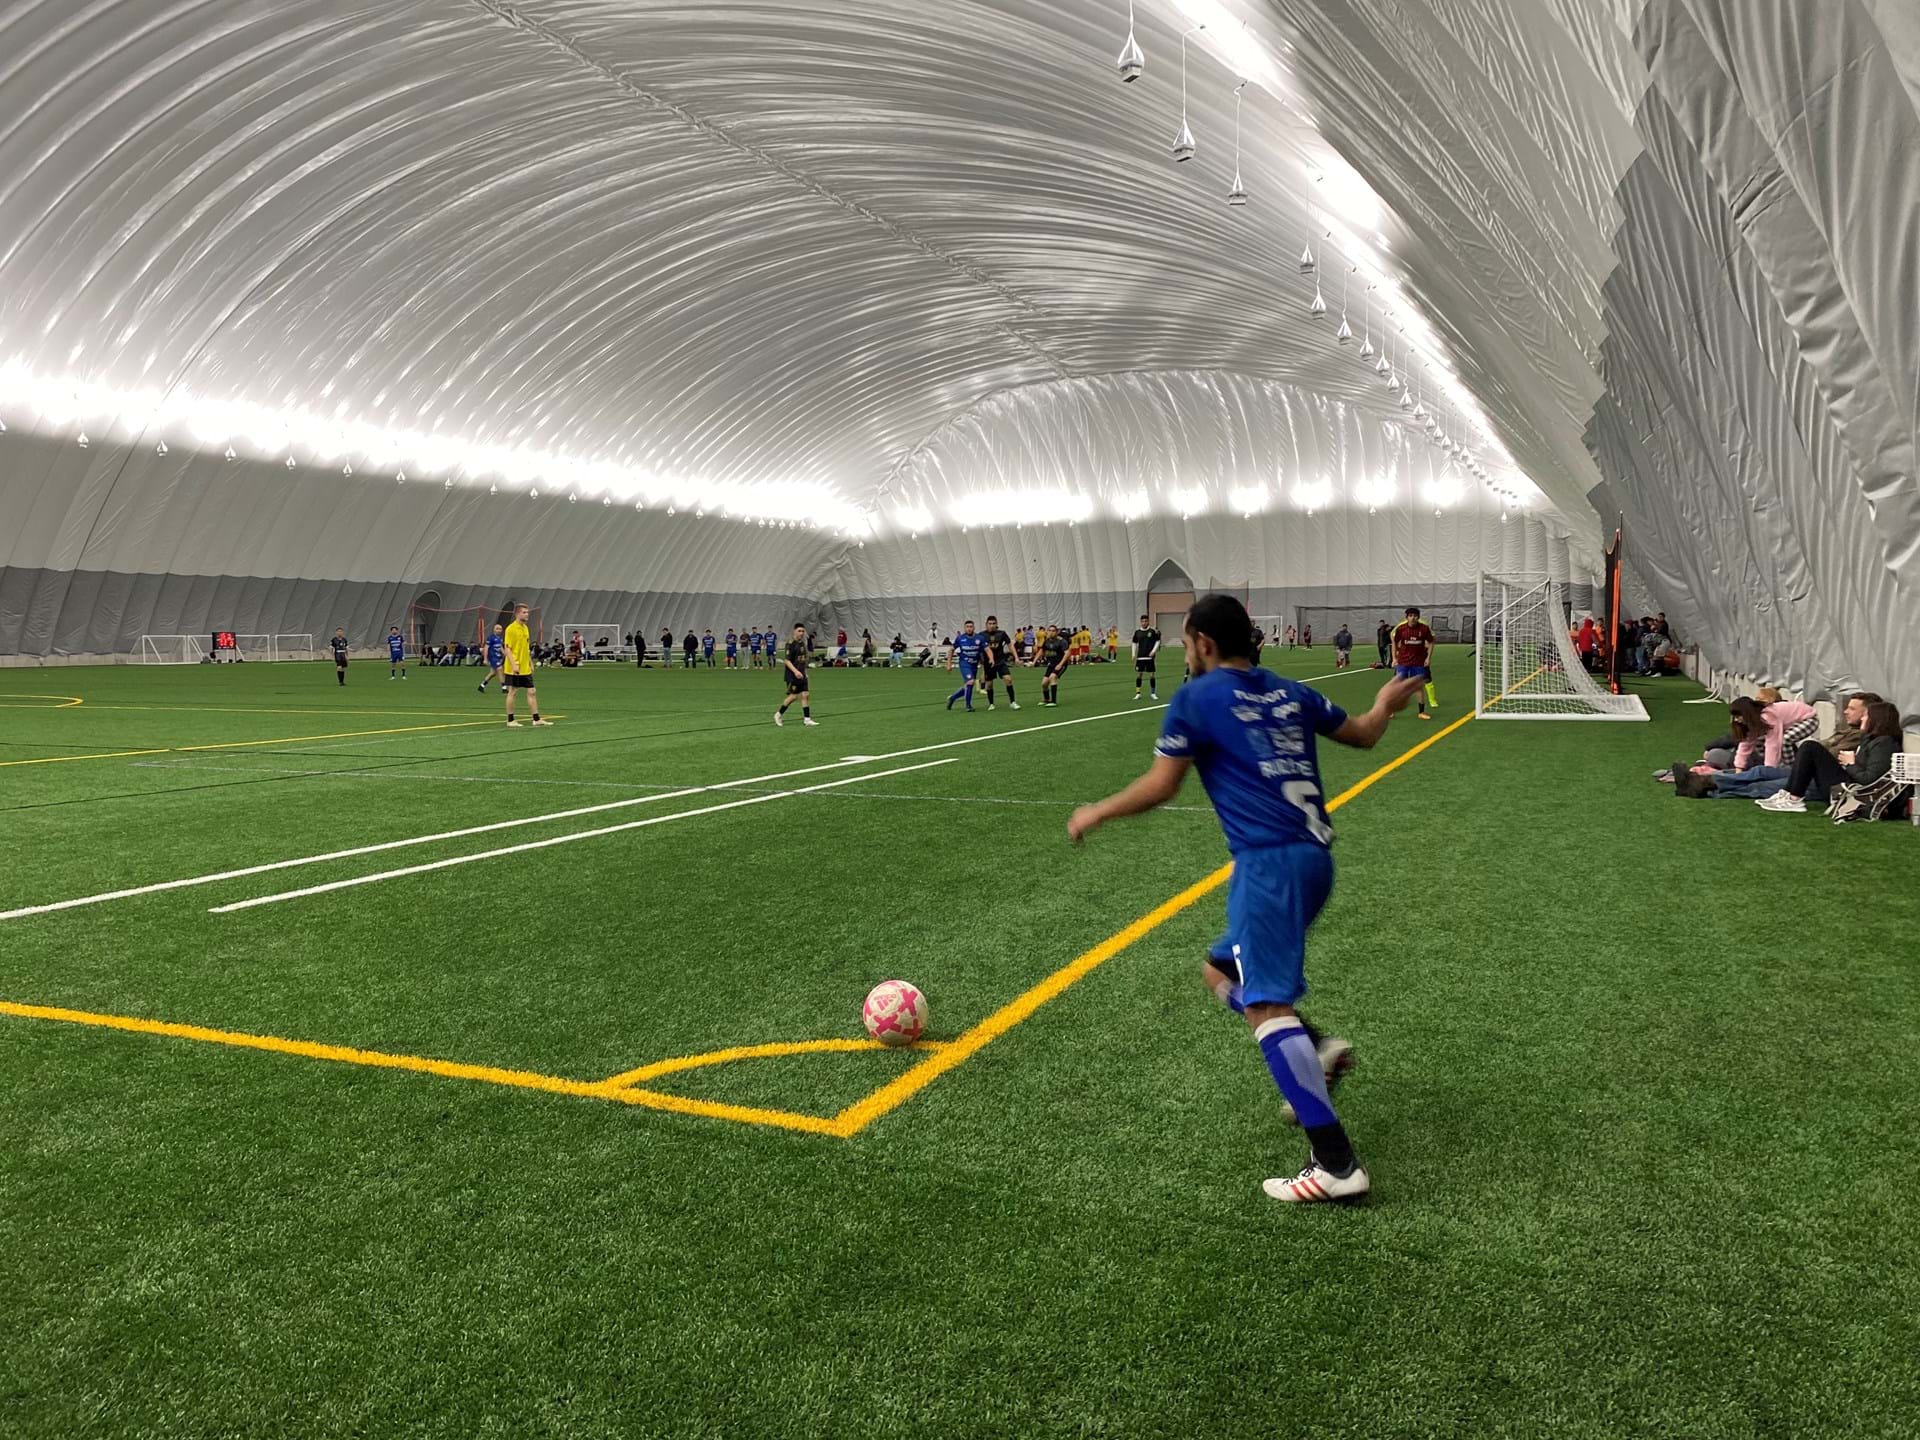 Turf can be used as two regulation softball fields, regulation soccer field, regulation football field, and 2-3 smaller soccer fields for tournament or youth play, plus for wellness activities, walking/jogging, private rentals, and community events.